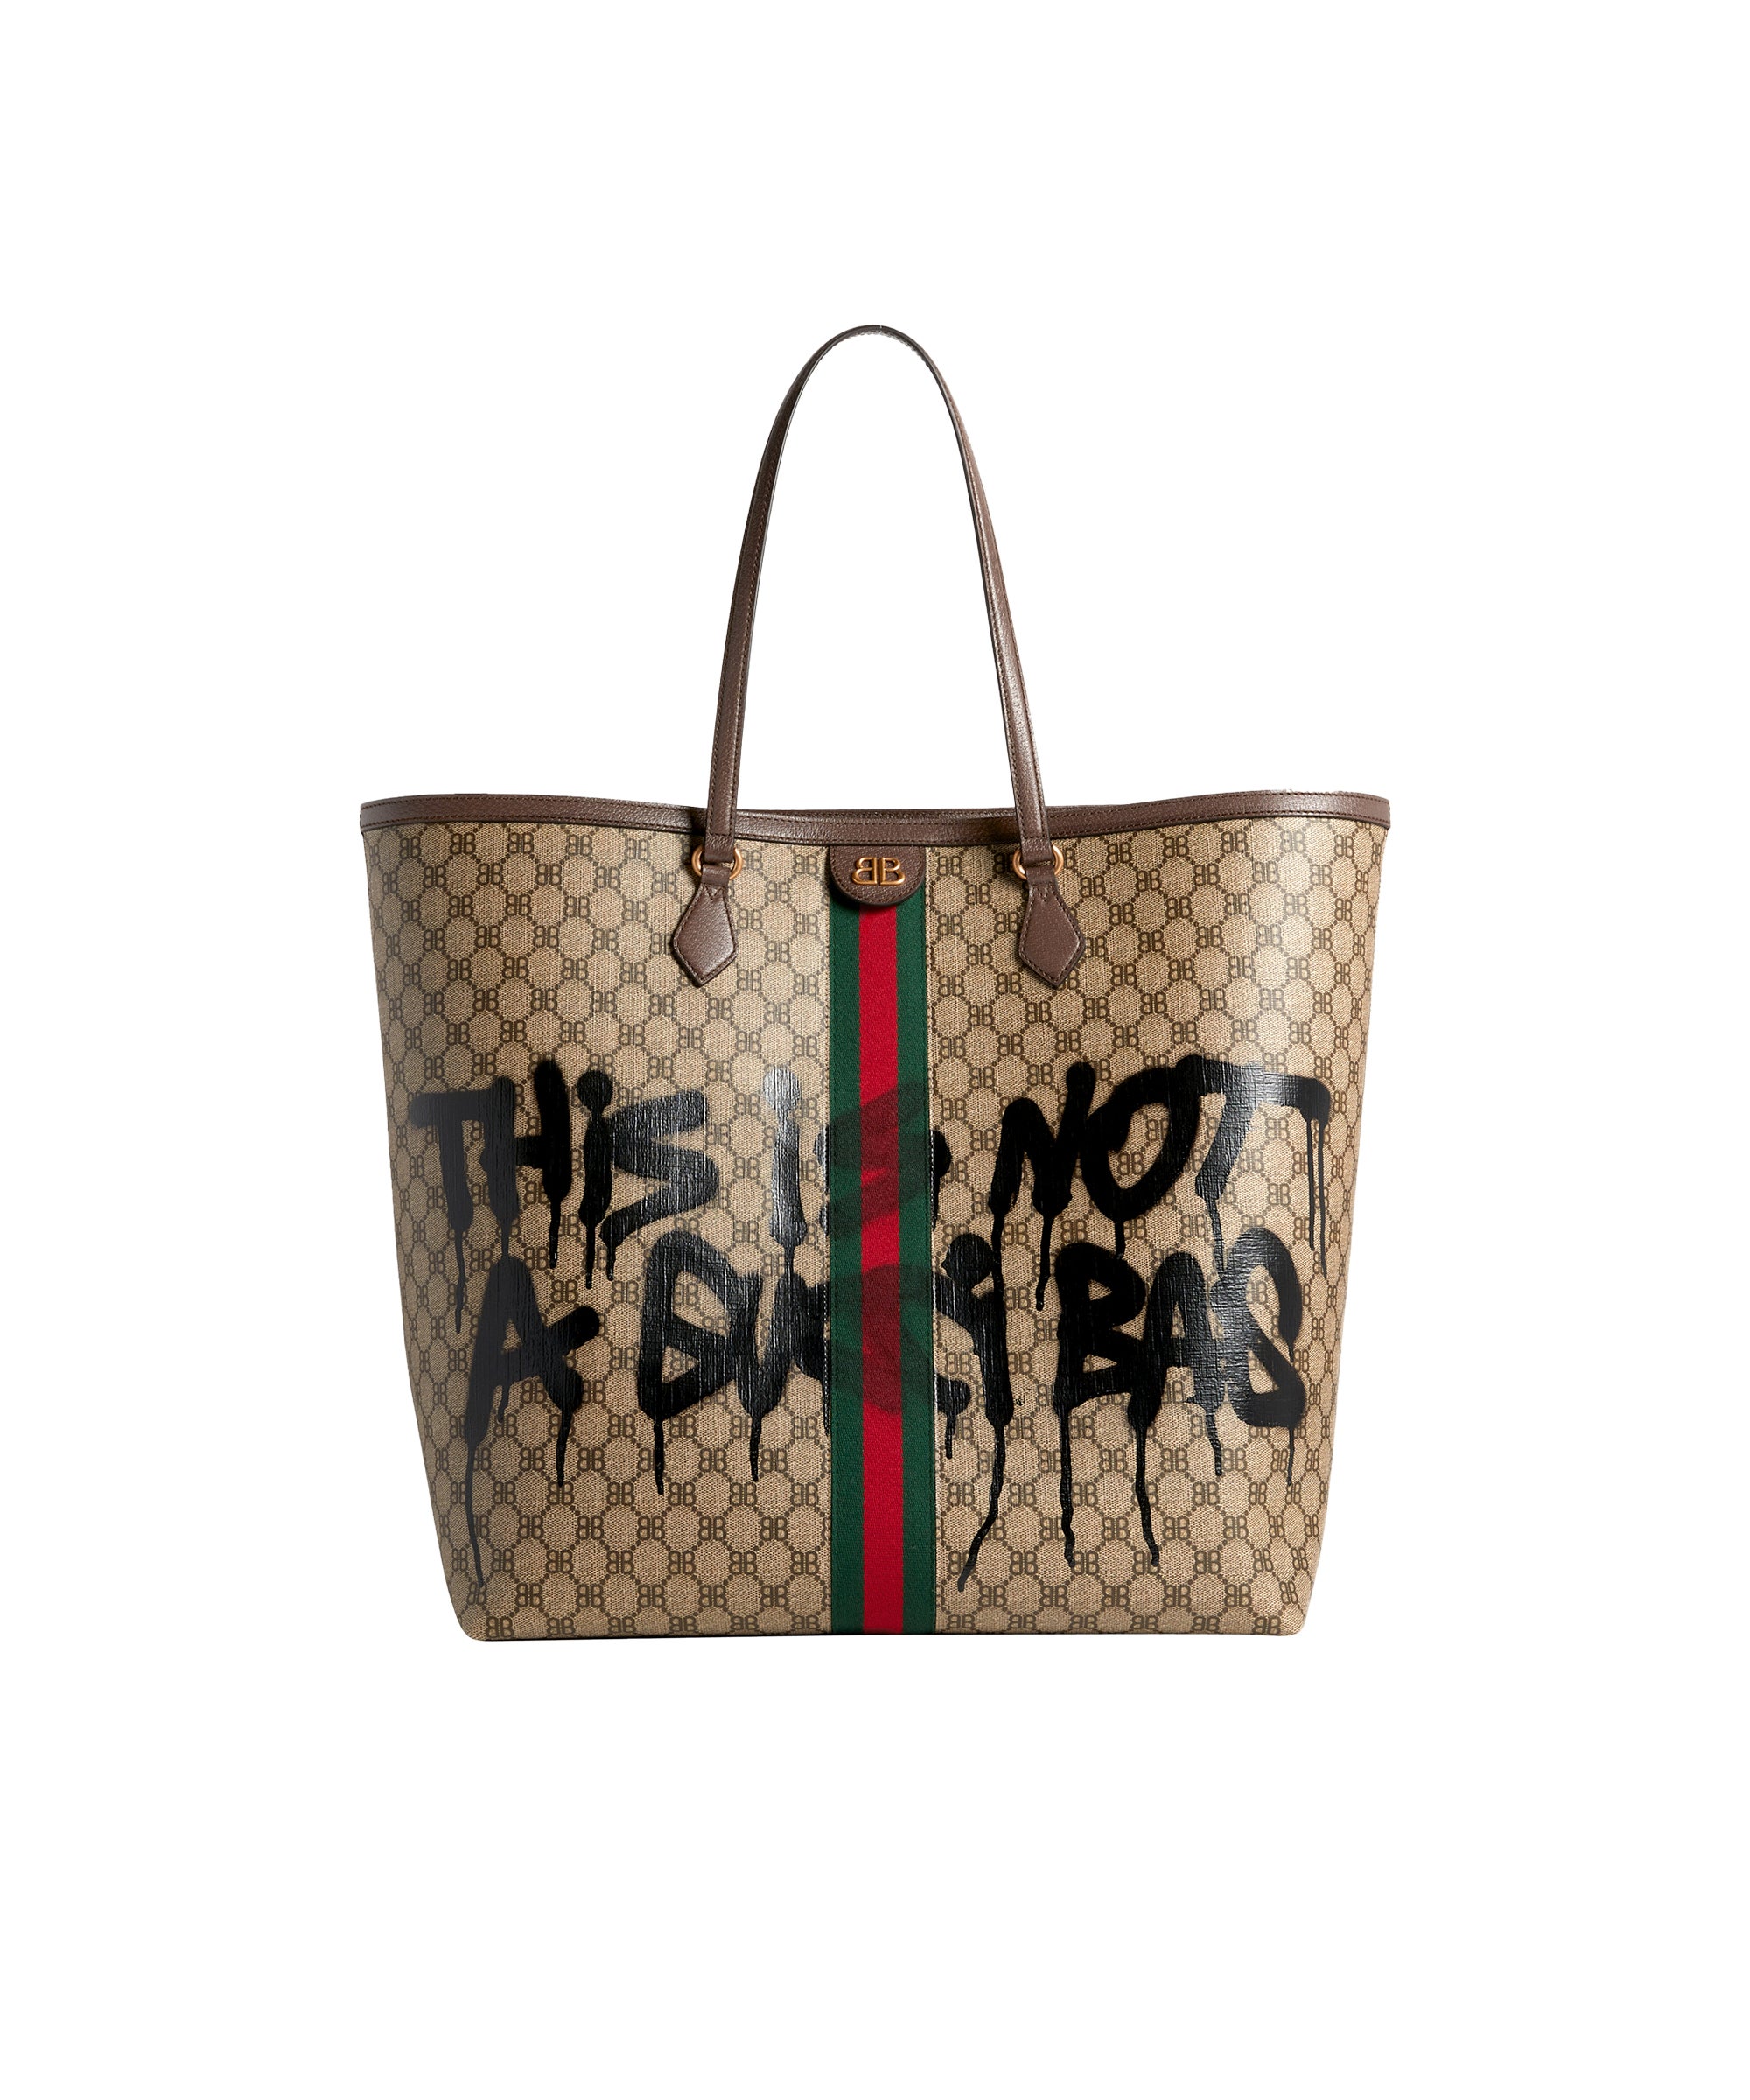 Gucci plunders Balenciaga for 100th birthday collection